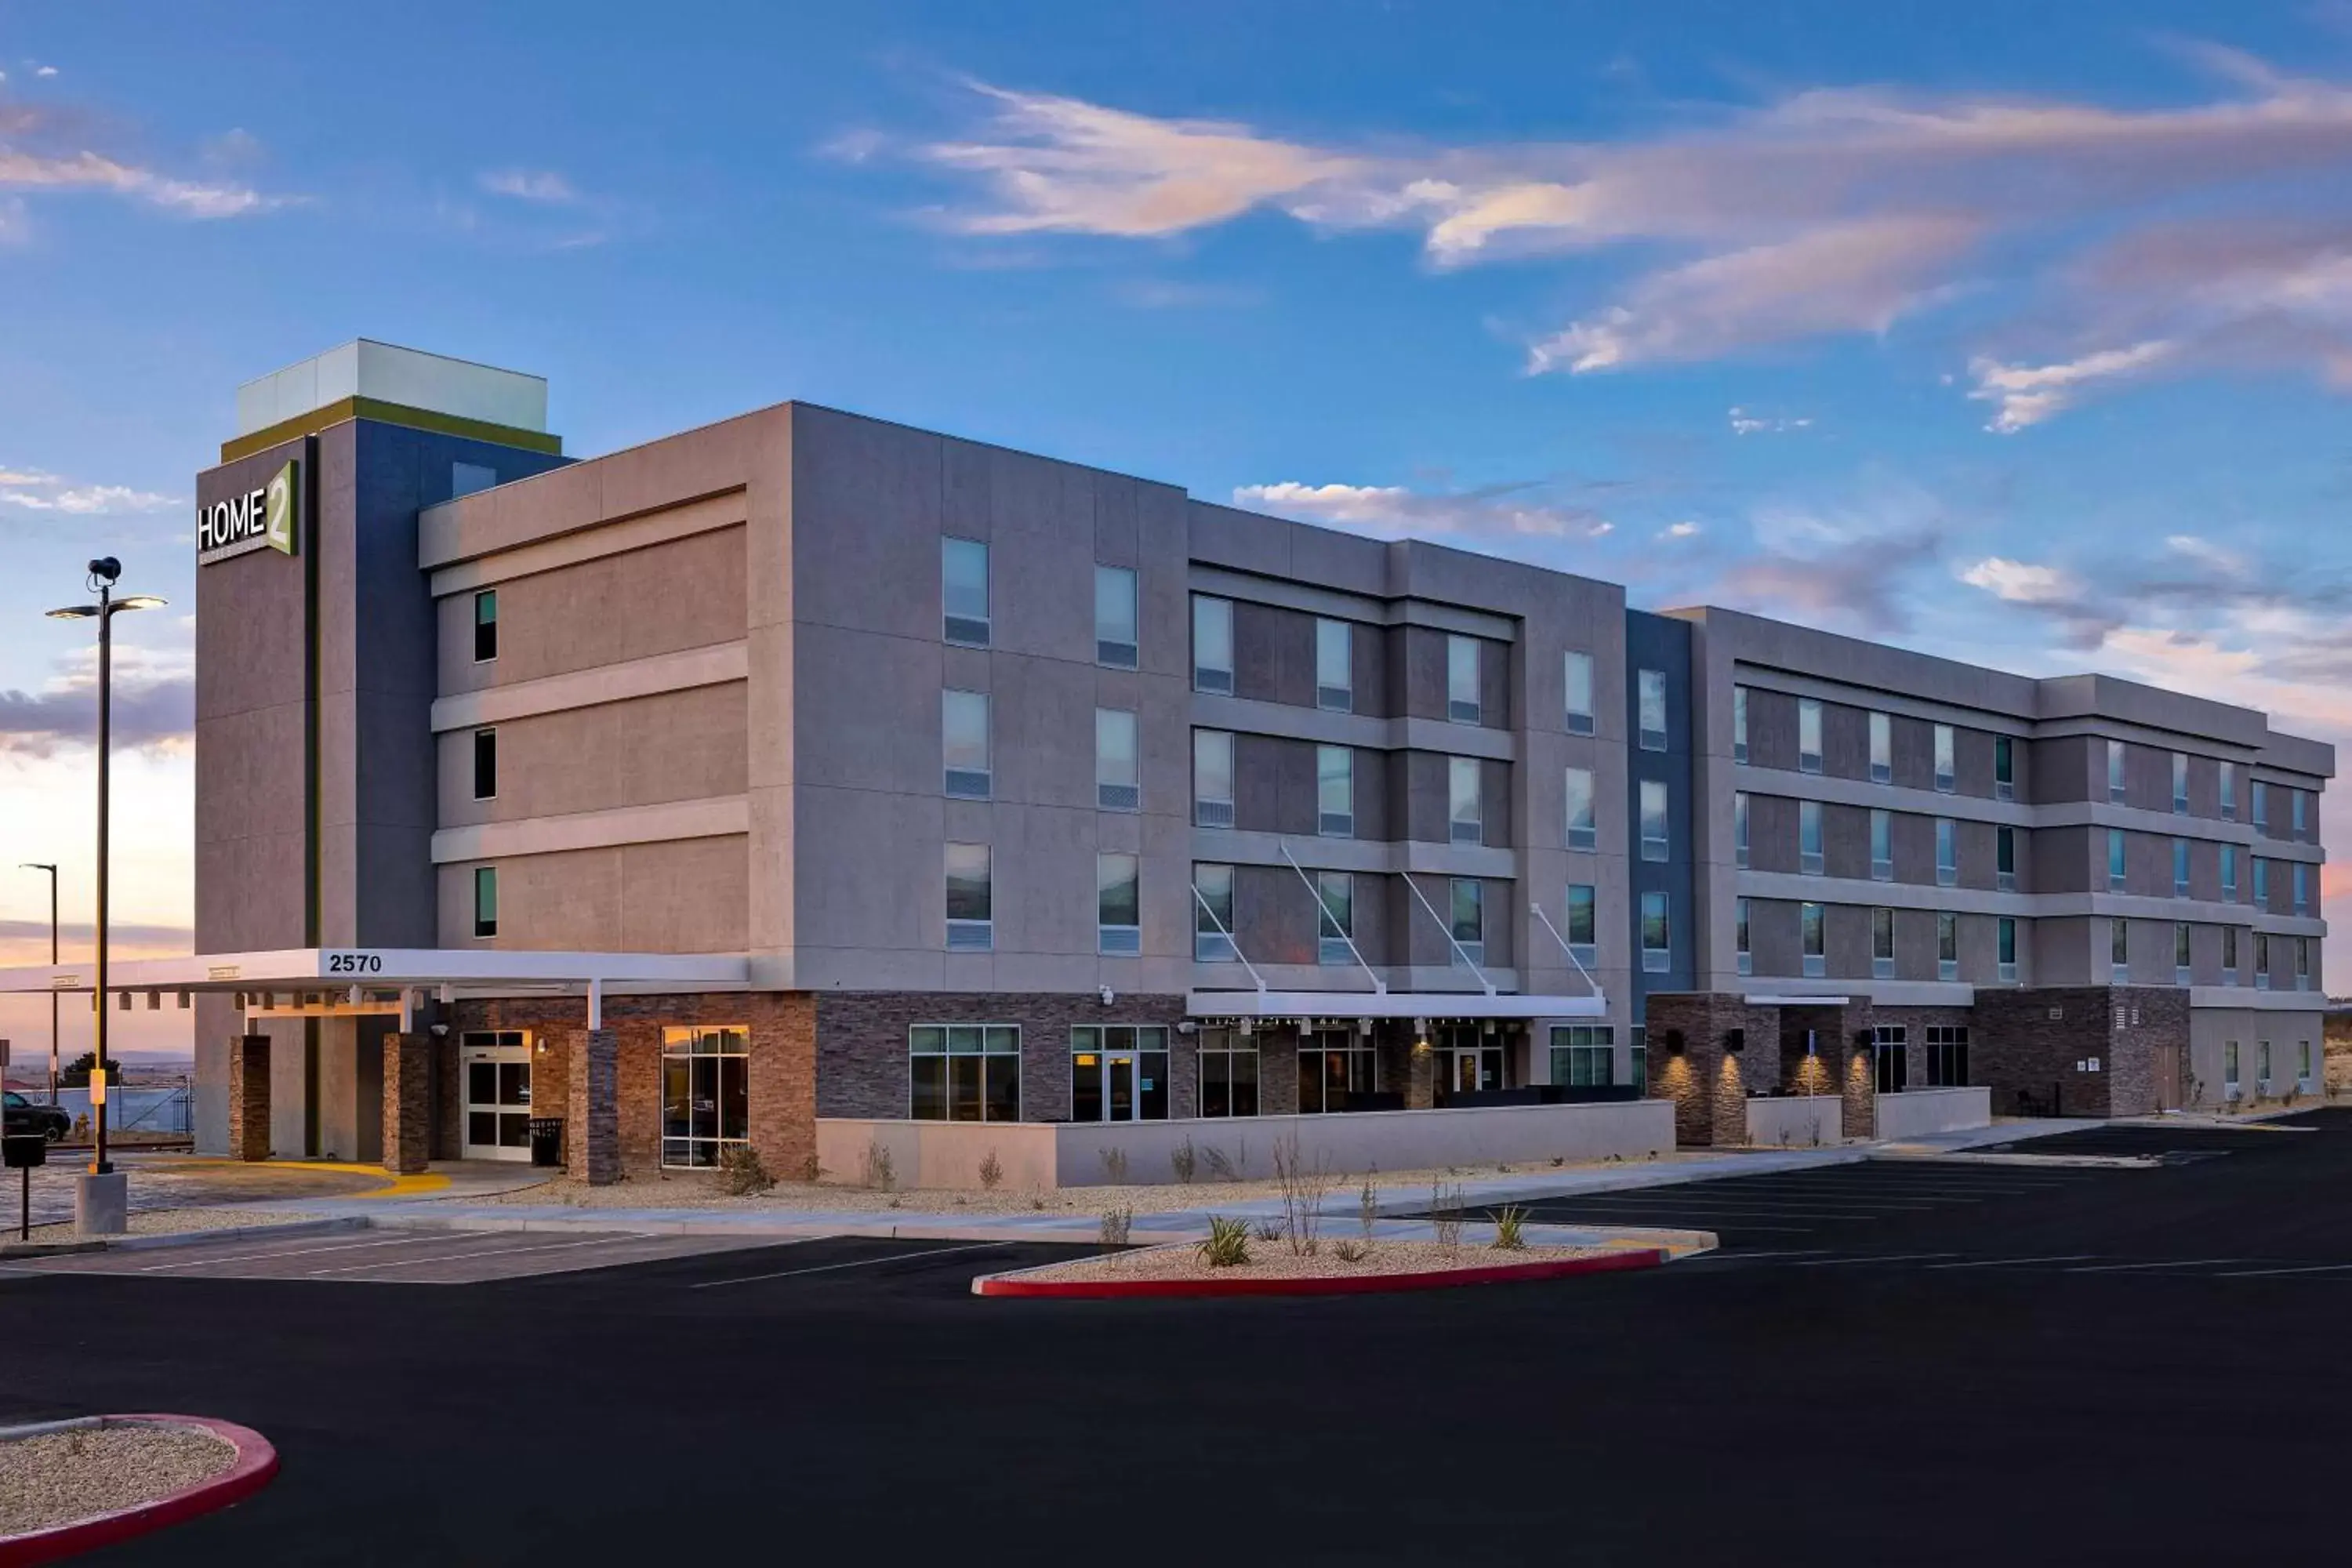 Property Building in Home2 Suites By Hilton Barstow, Ca